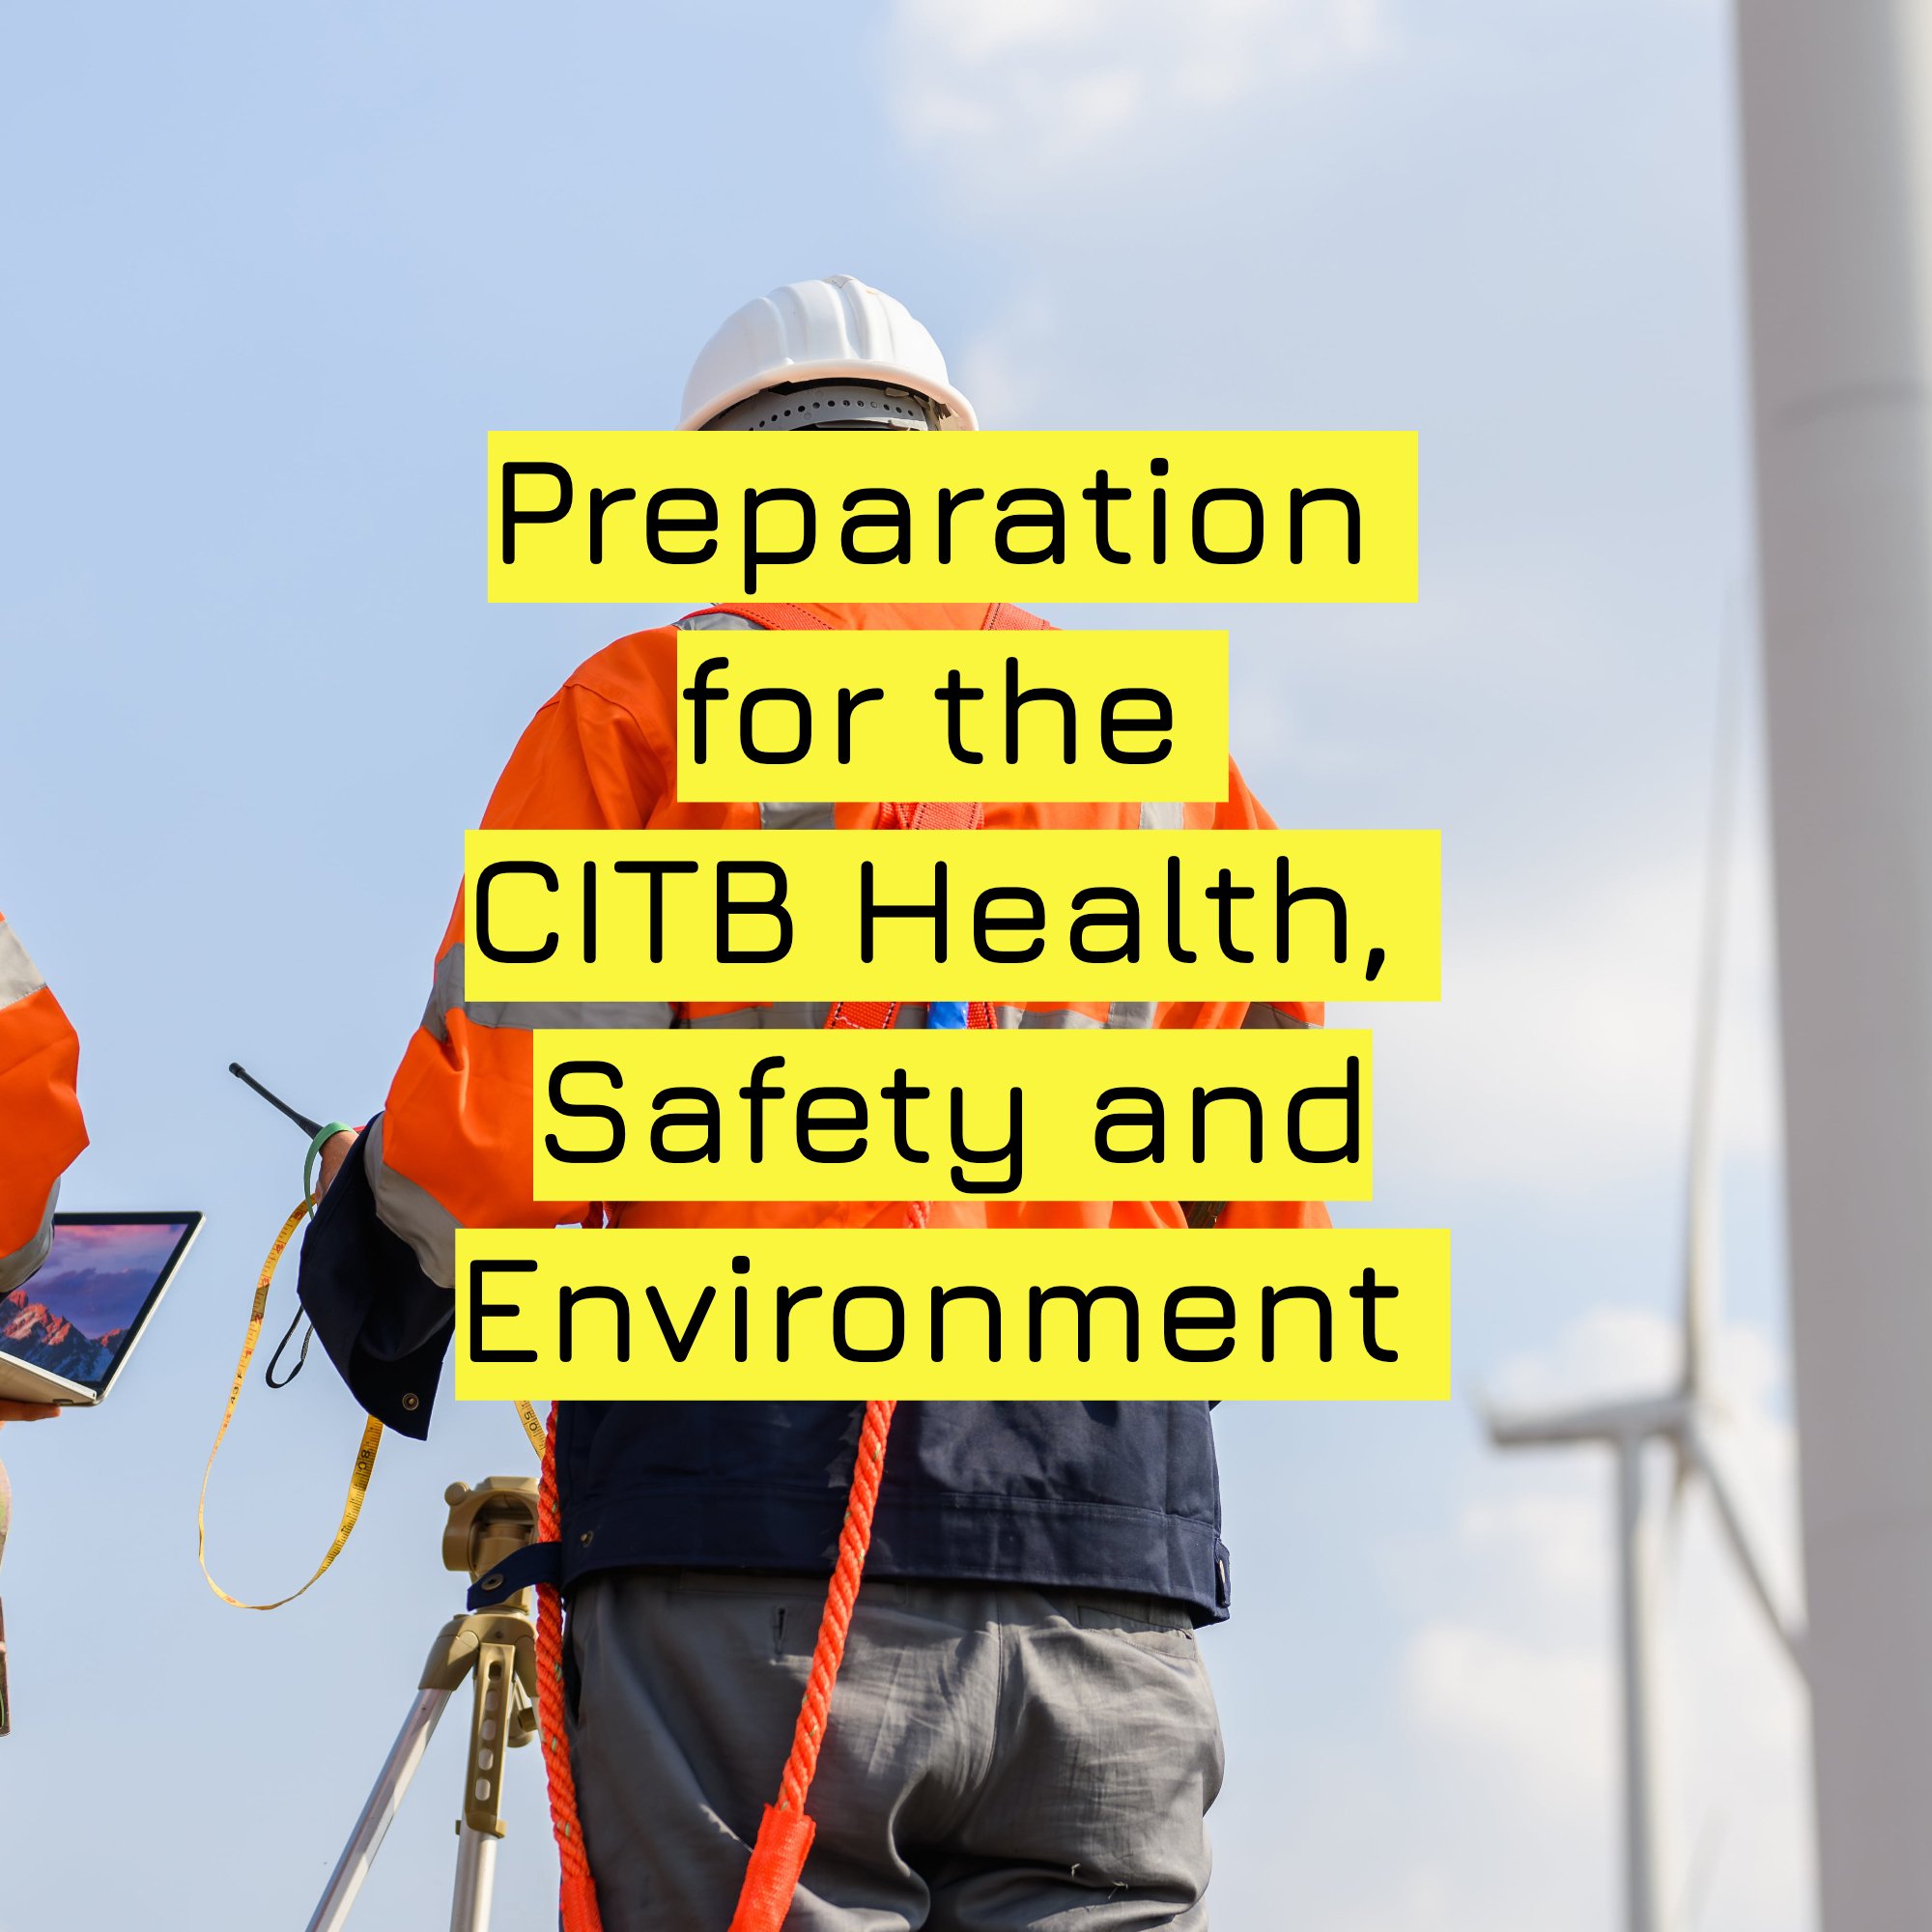 Preparation  for the  CITB Health,  Safety and Environment .jpg